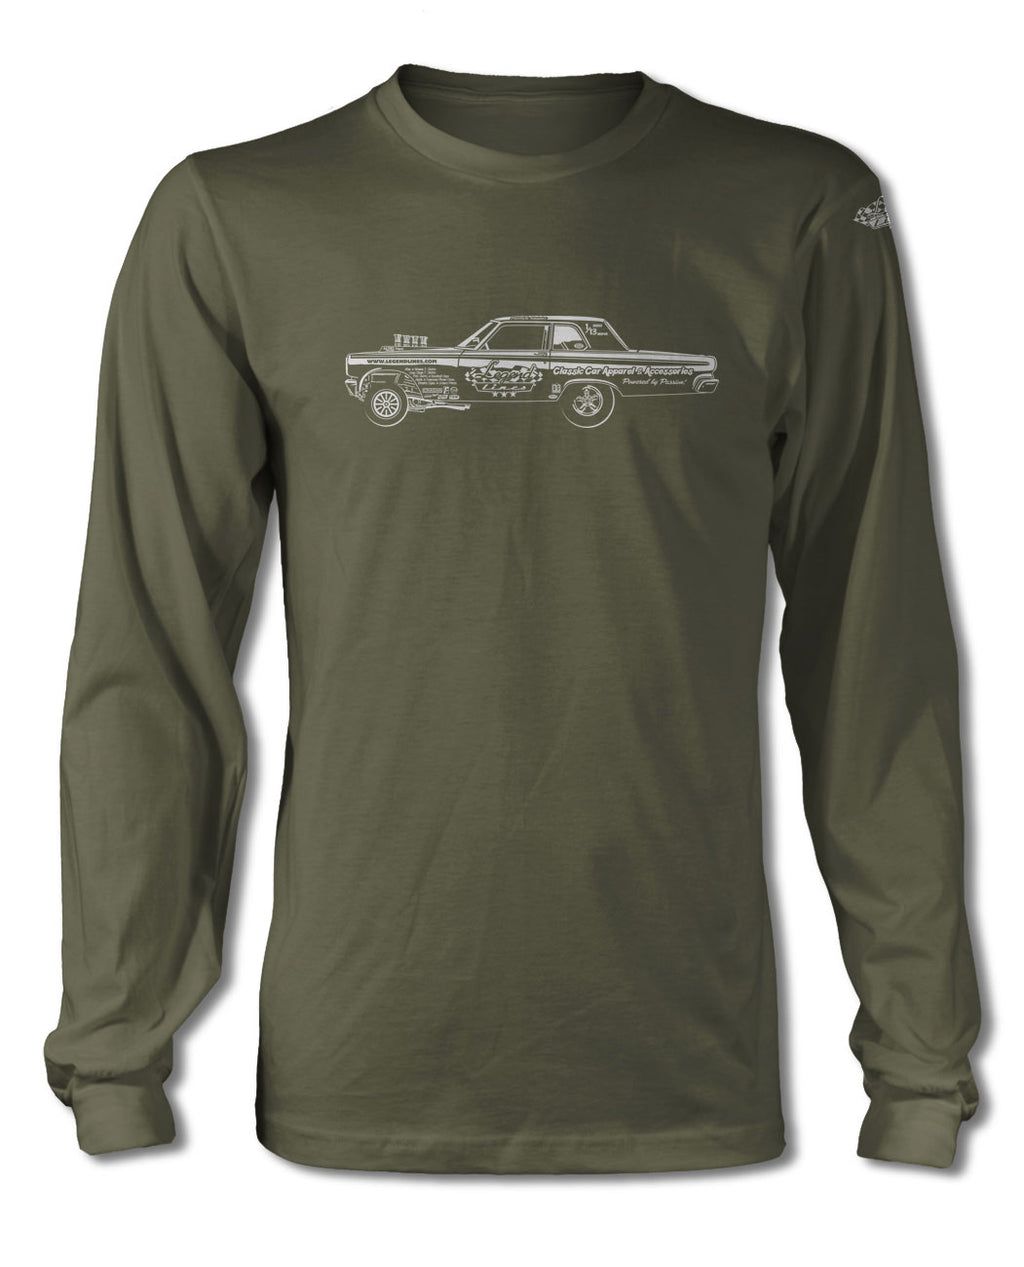 1965 Dodge Coronet Funny Car T-Shirt - Long Sleeves - Side View